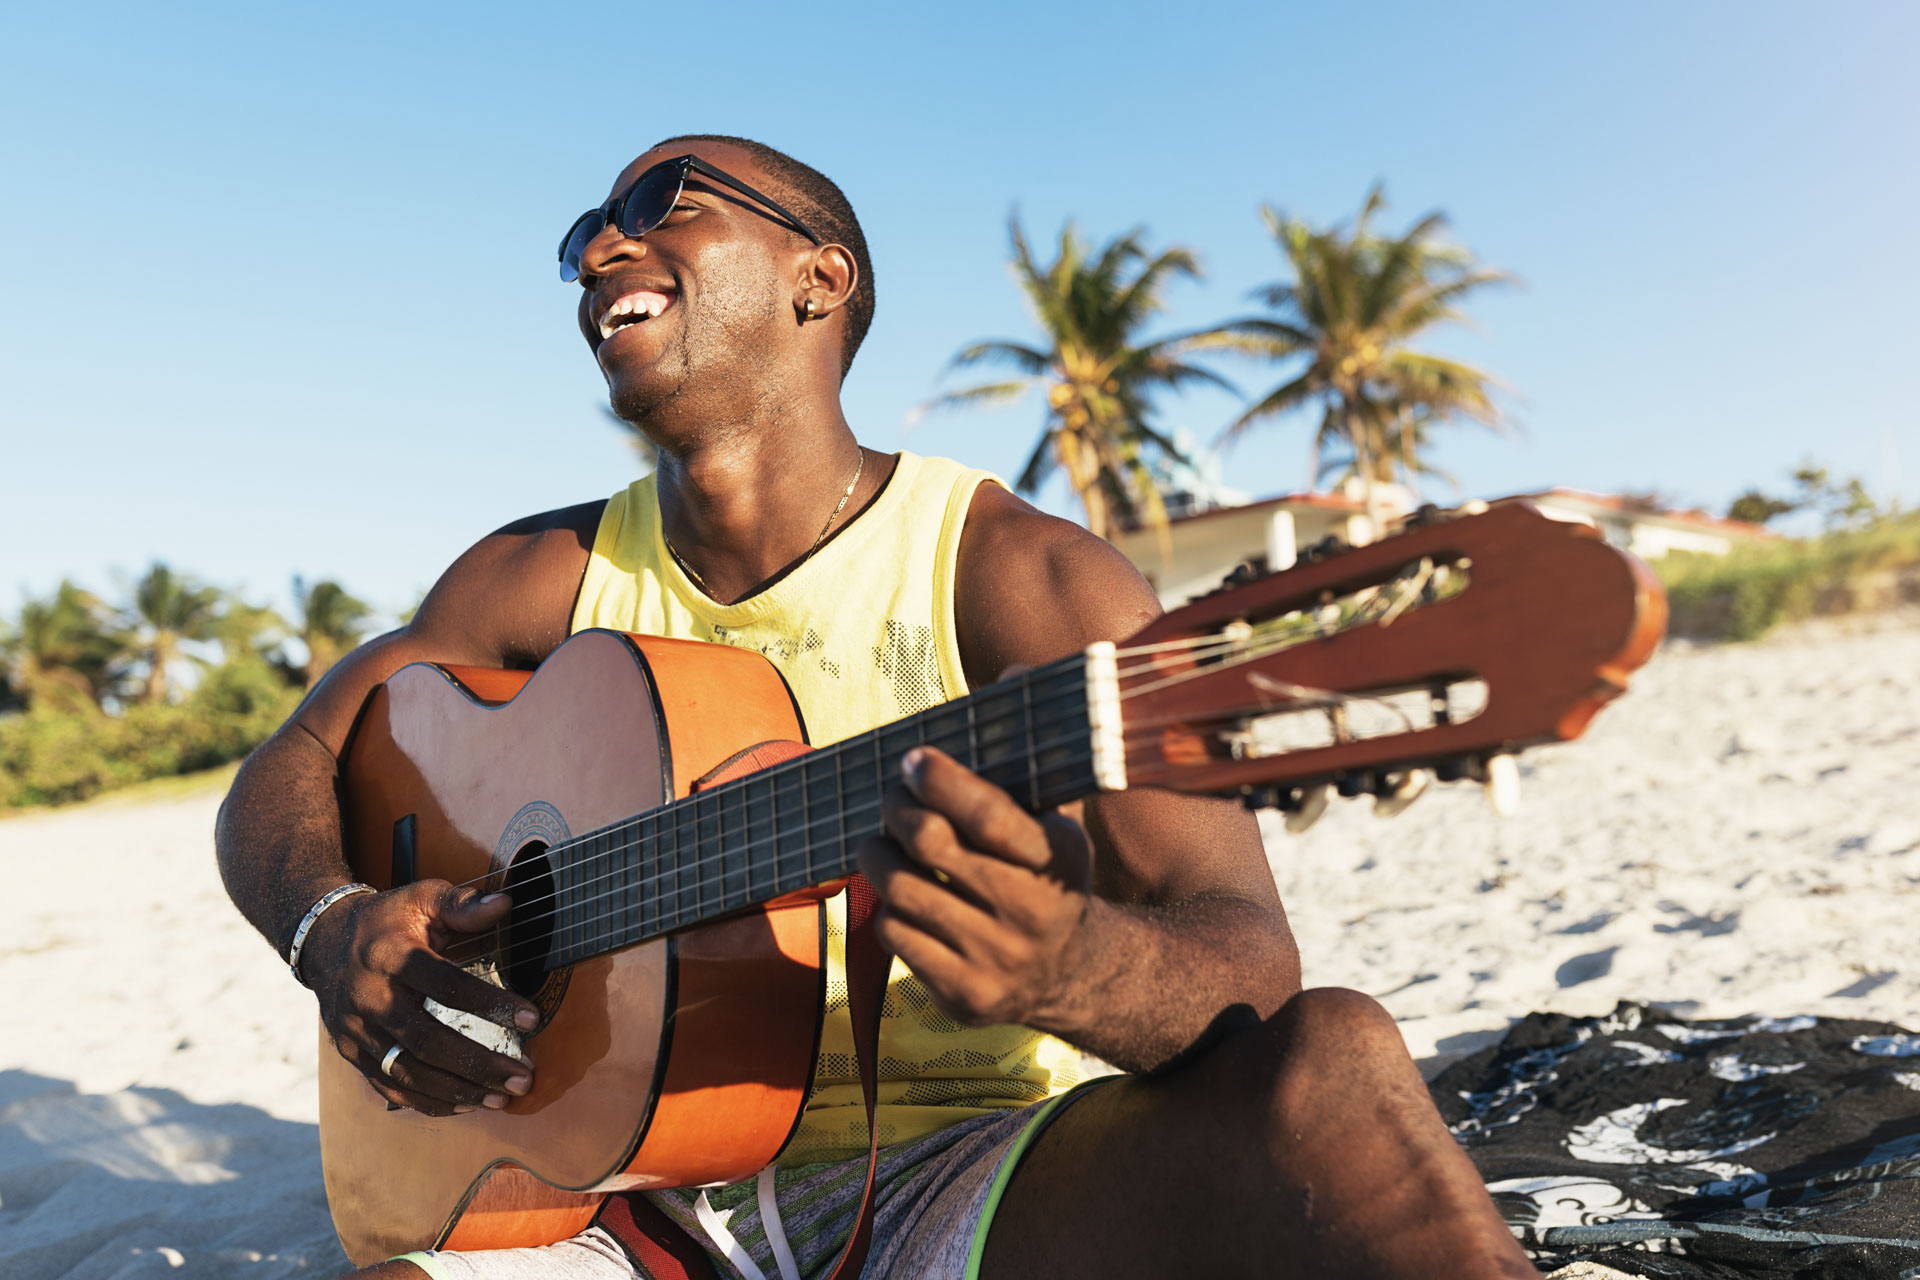 Young cuban man having fun in the beach with his guitar. Friendship concept.